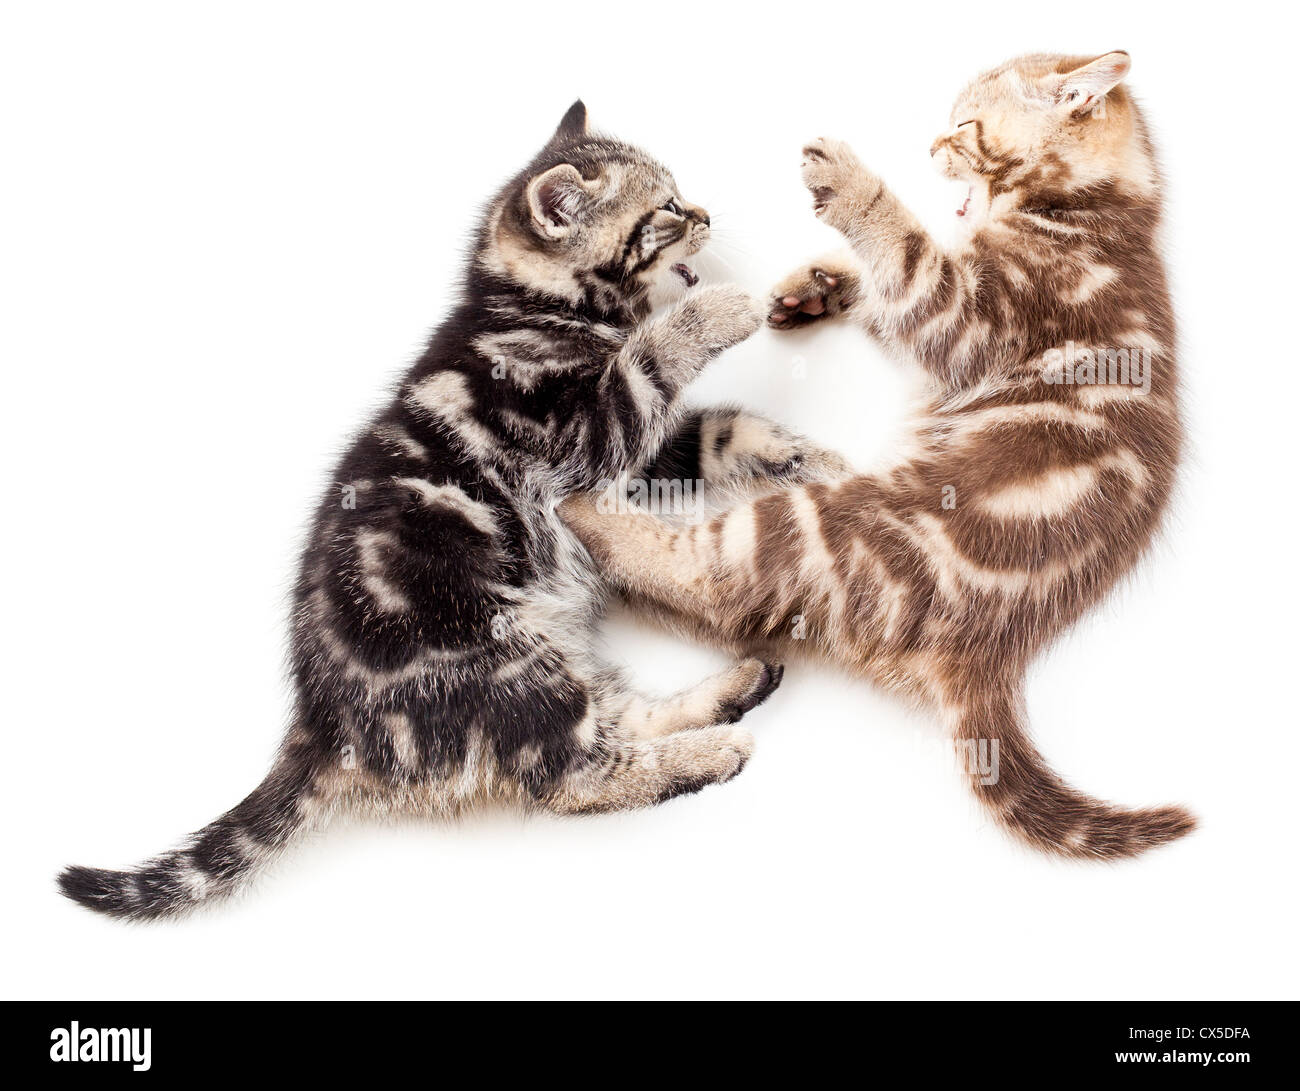 two kittens playing together Stock Photo